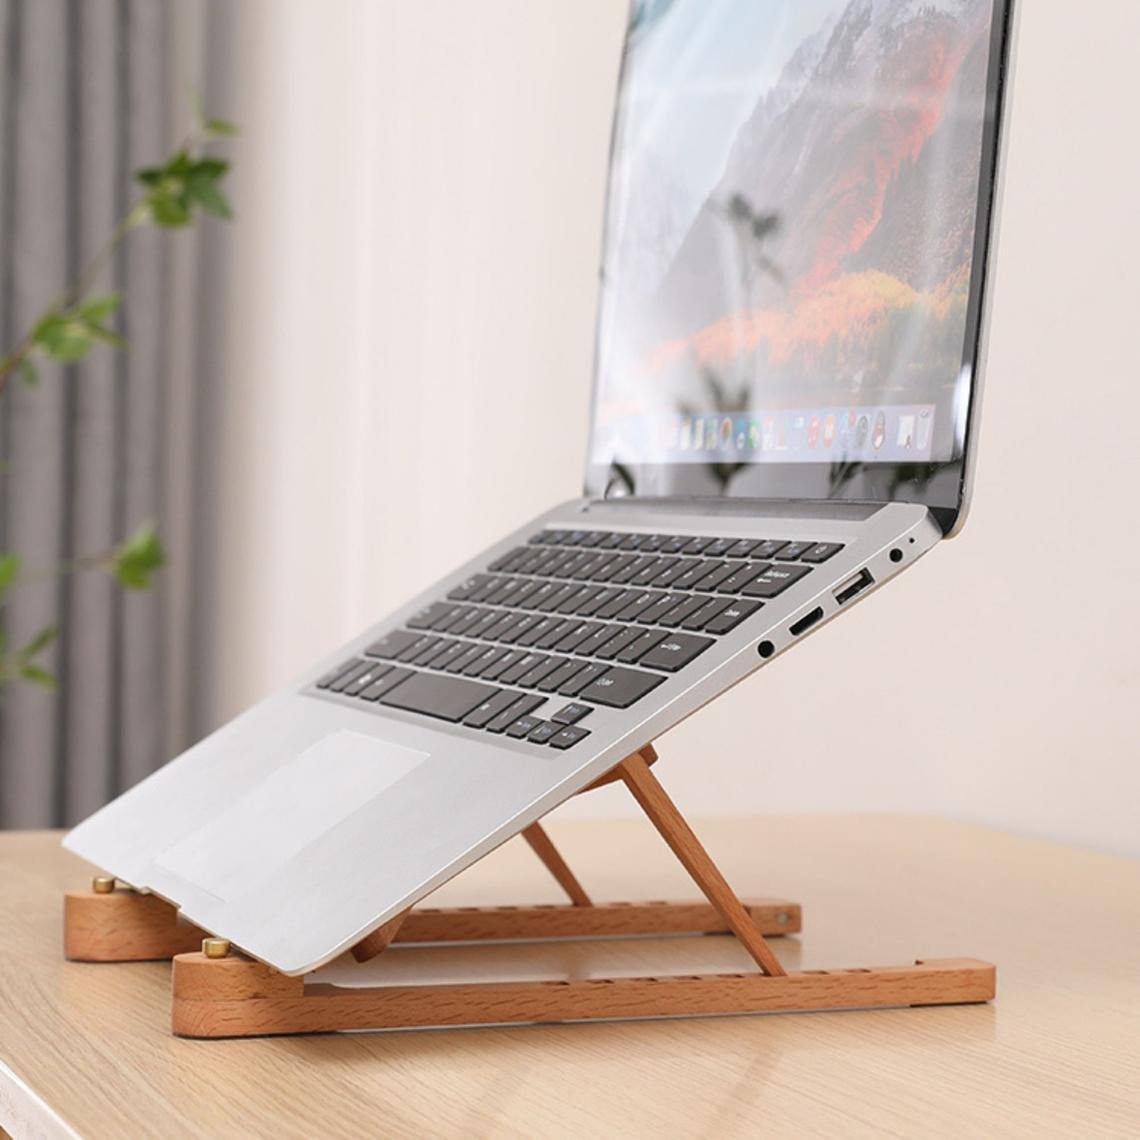 Portable laptop stand wood for MacBook, Lenovo, HP, Asus, Acer 